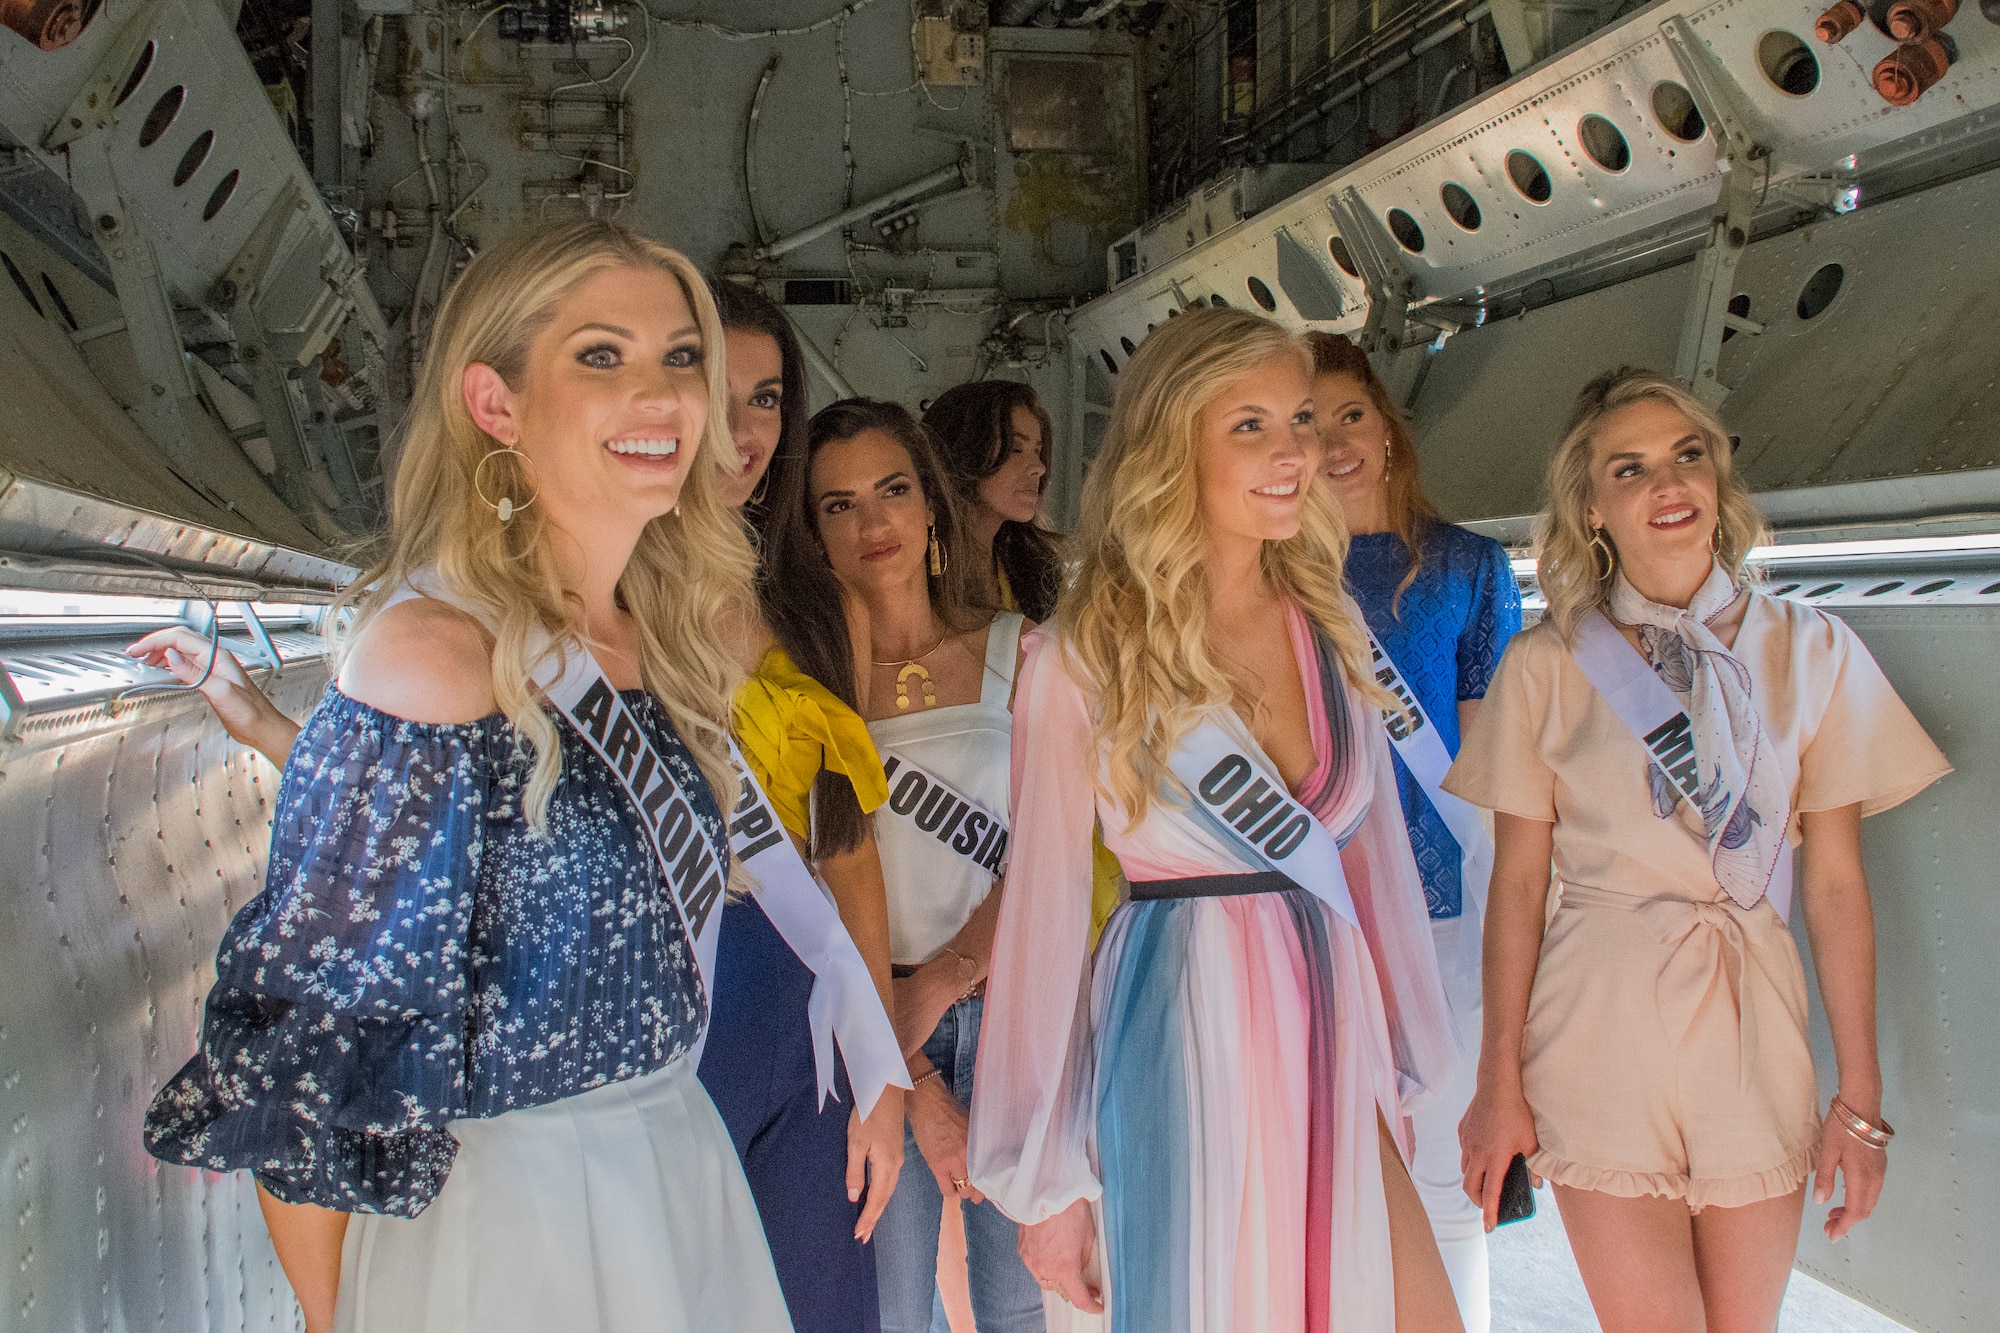 Contestants in the 2018 Miss USA pageant look inside the bomb bay of a B-52 Stratofortress during their visit to Barksdale Air Force Base, Louisiana, May 15, 2018.